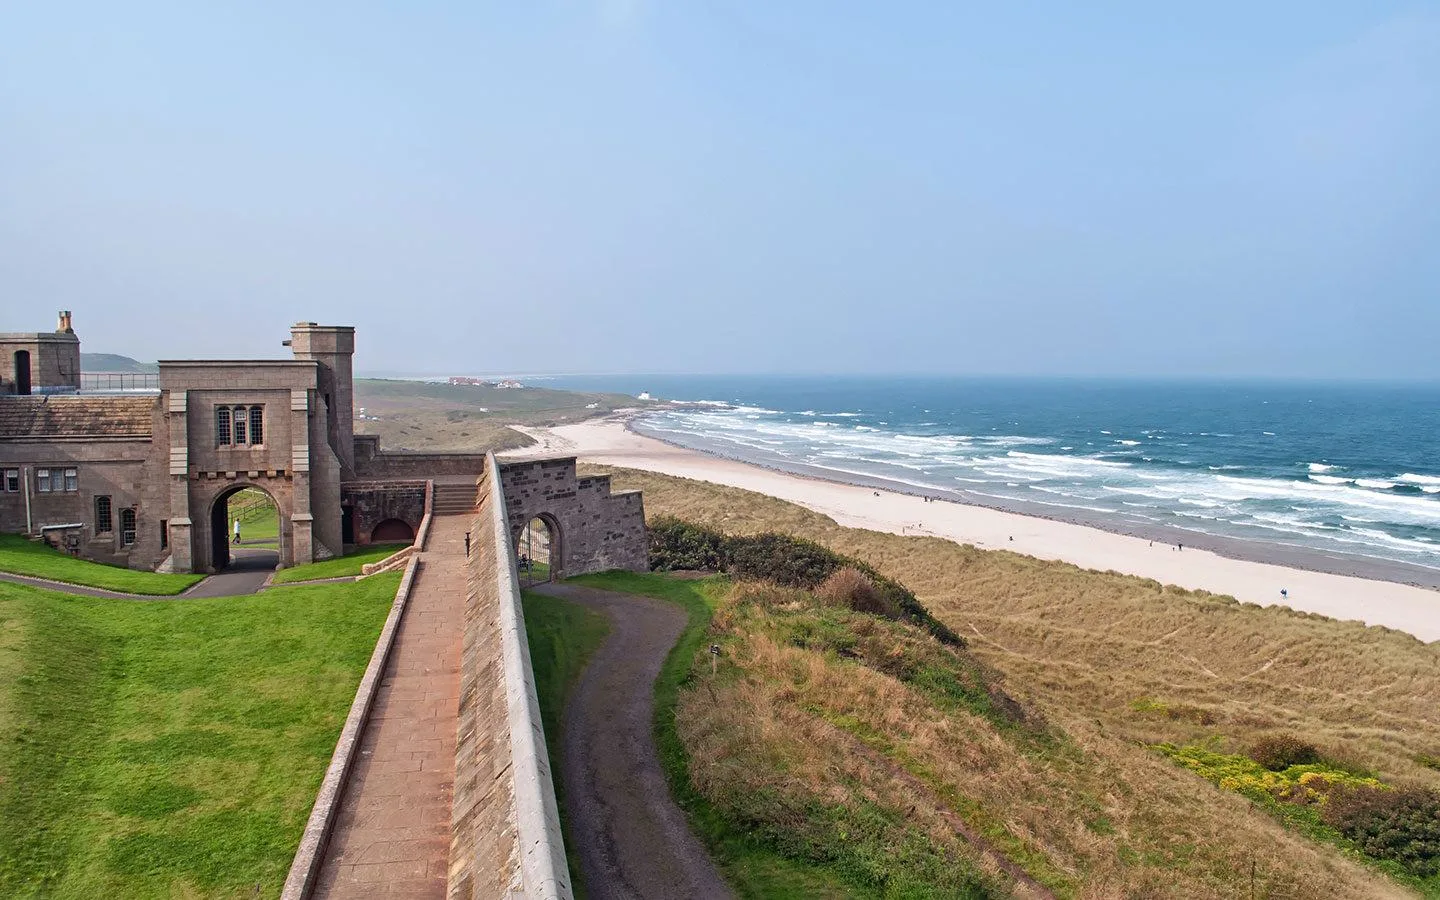 Bamburgh Beach, Northumerland, seen from the castle